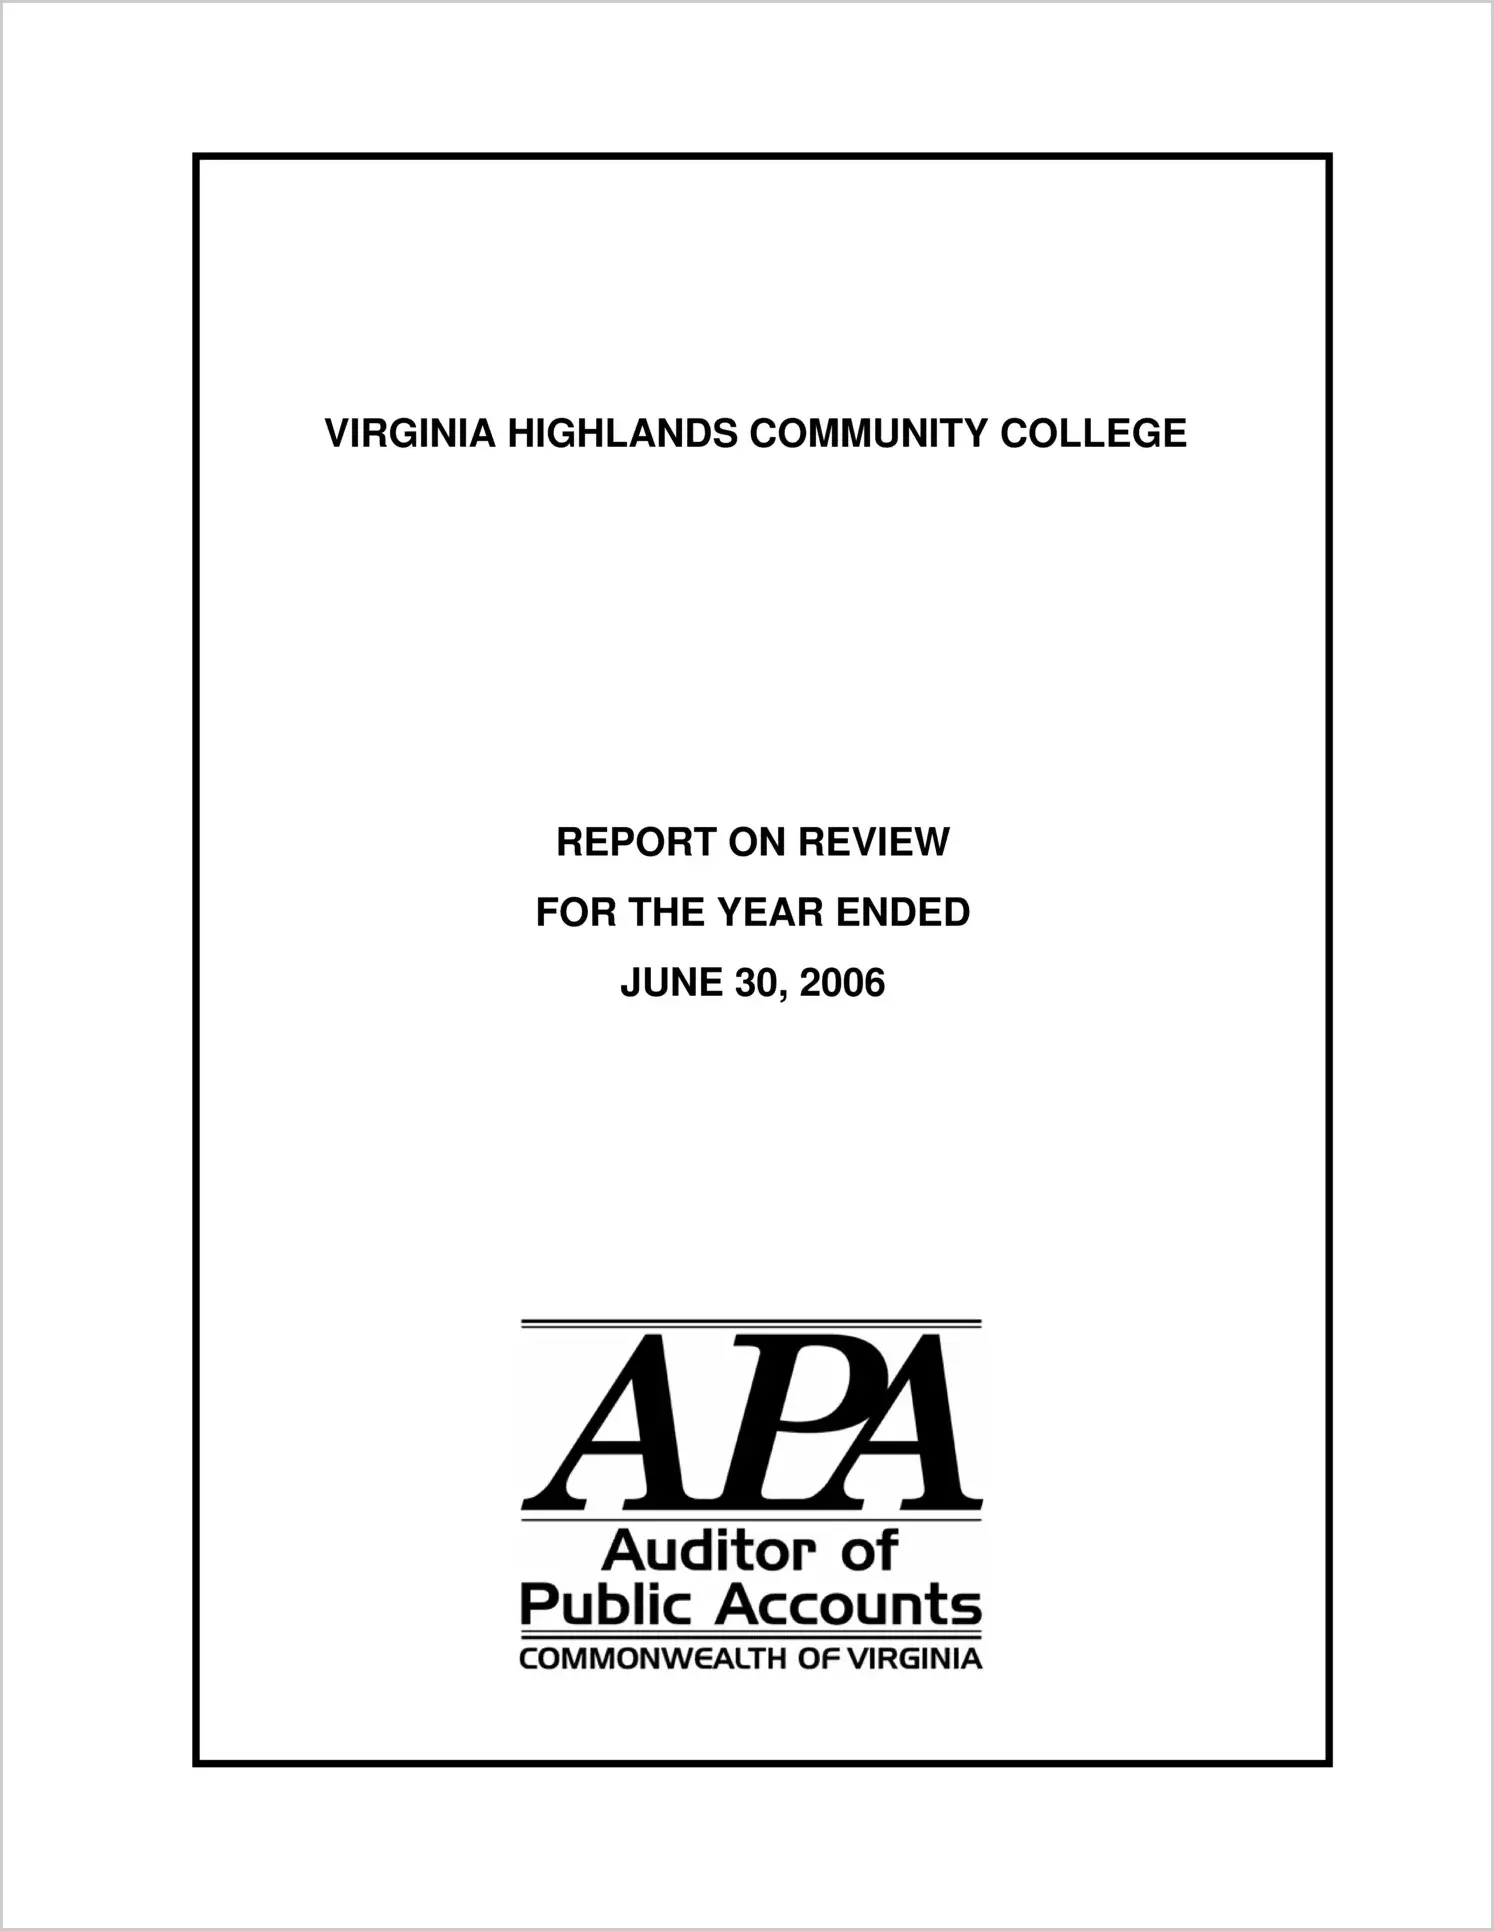 Virginia Highlands Community College Report on review for the year ended June 30, 2006